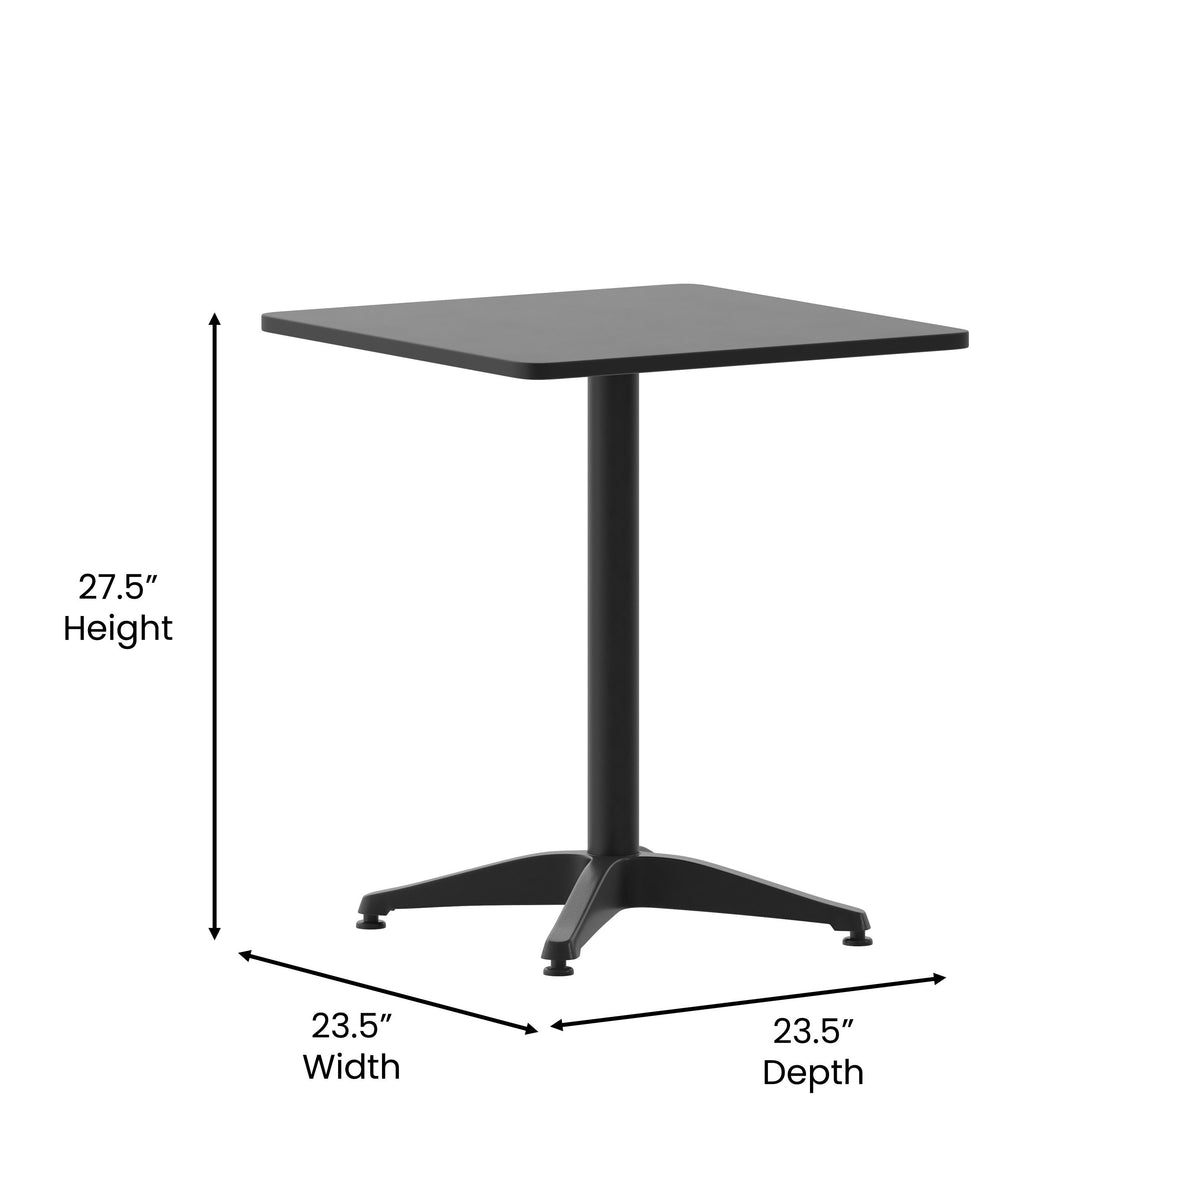 Black |#| 23.5inch Square Metal Smooth Top Indoor-Outdoor Table with Base - Black